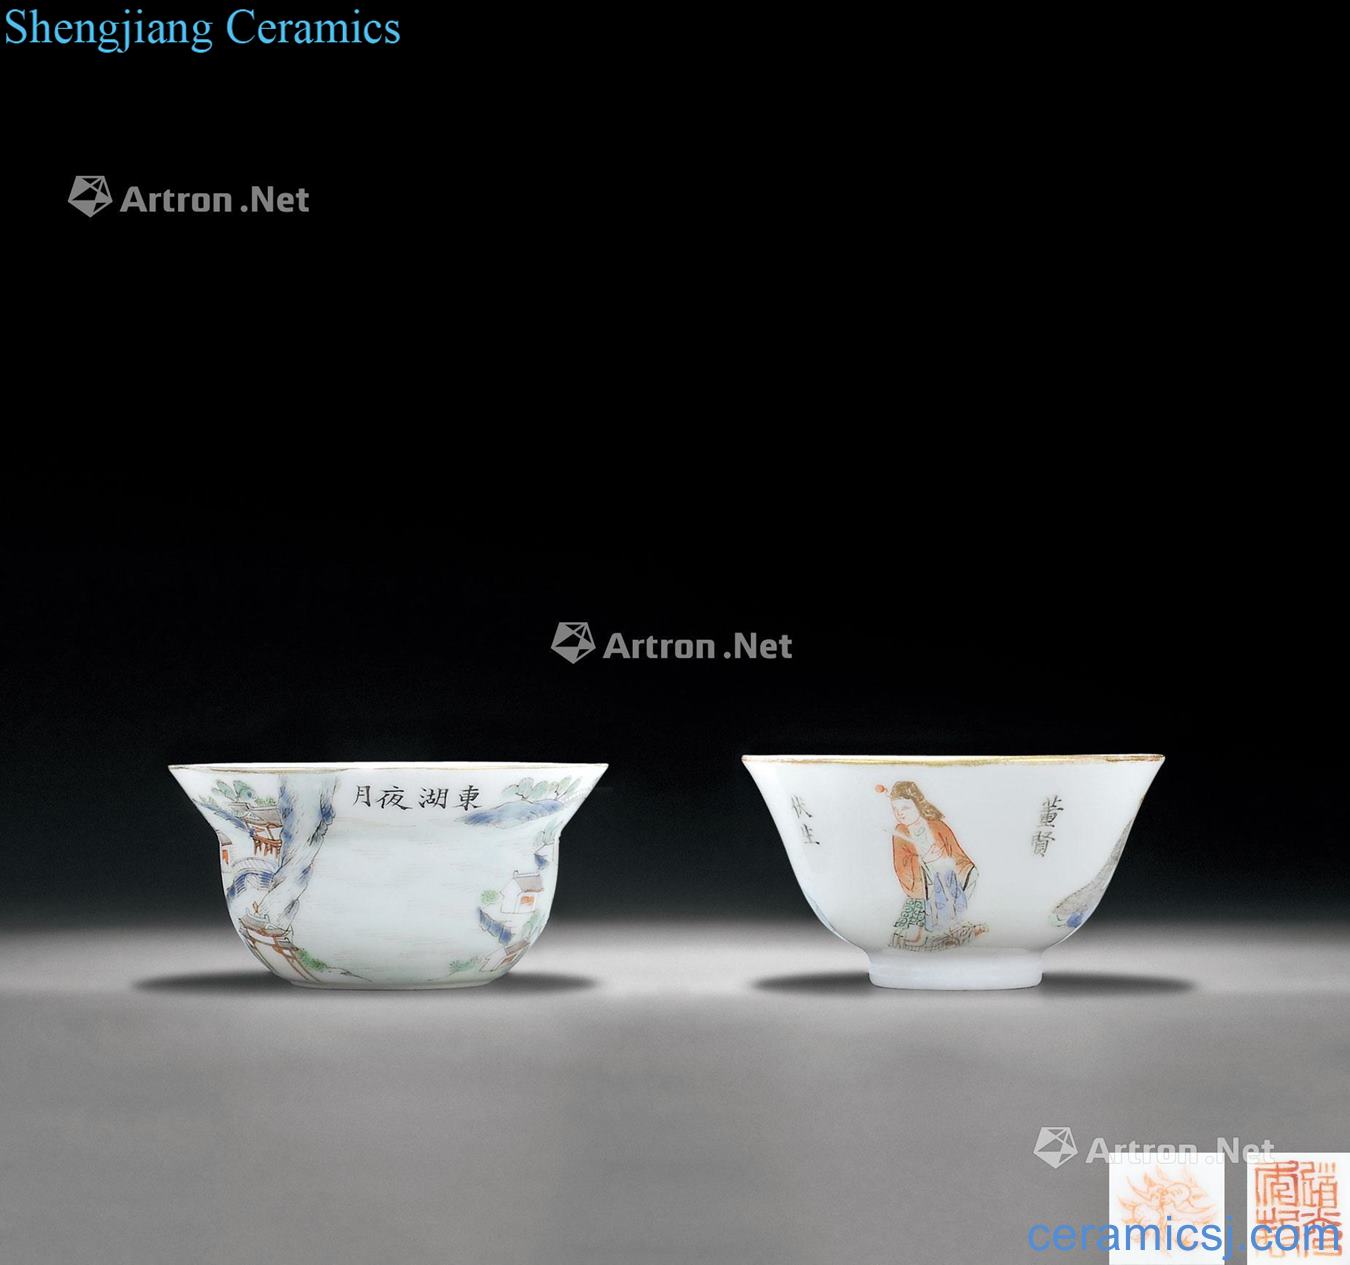 Clear light pastel stories of unique spectrum diagram Pastel jiangxi ten views on east lake night landscape character lines cup each one